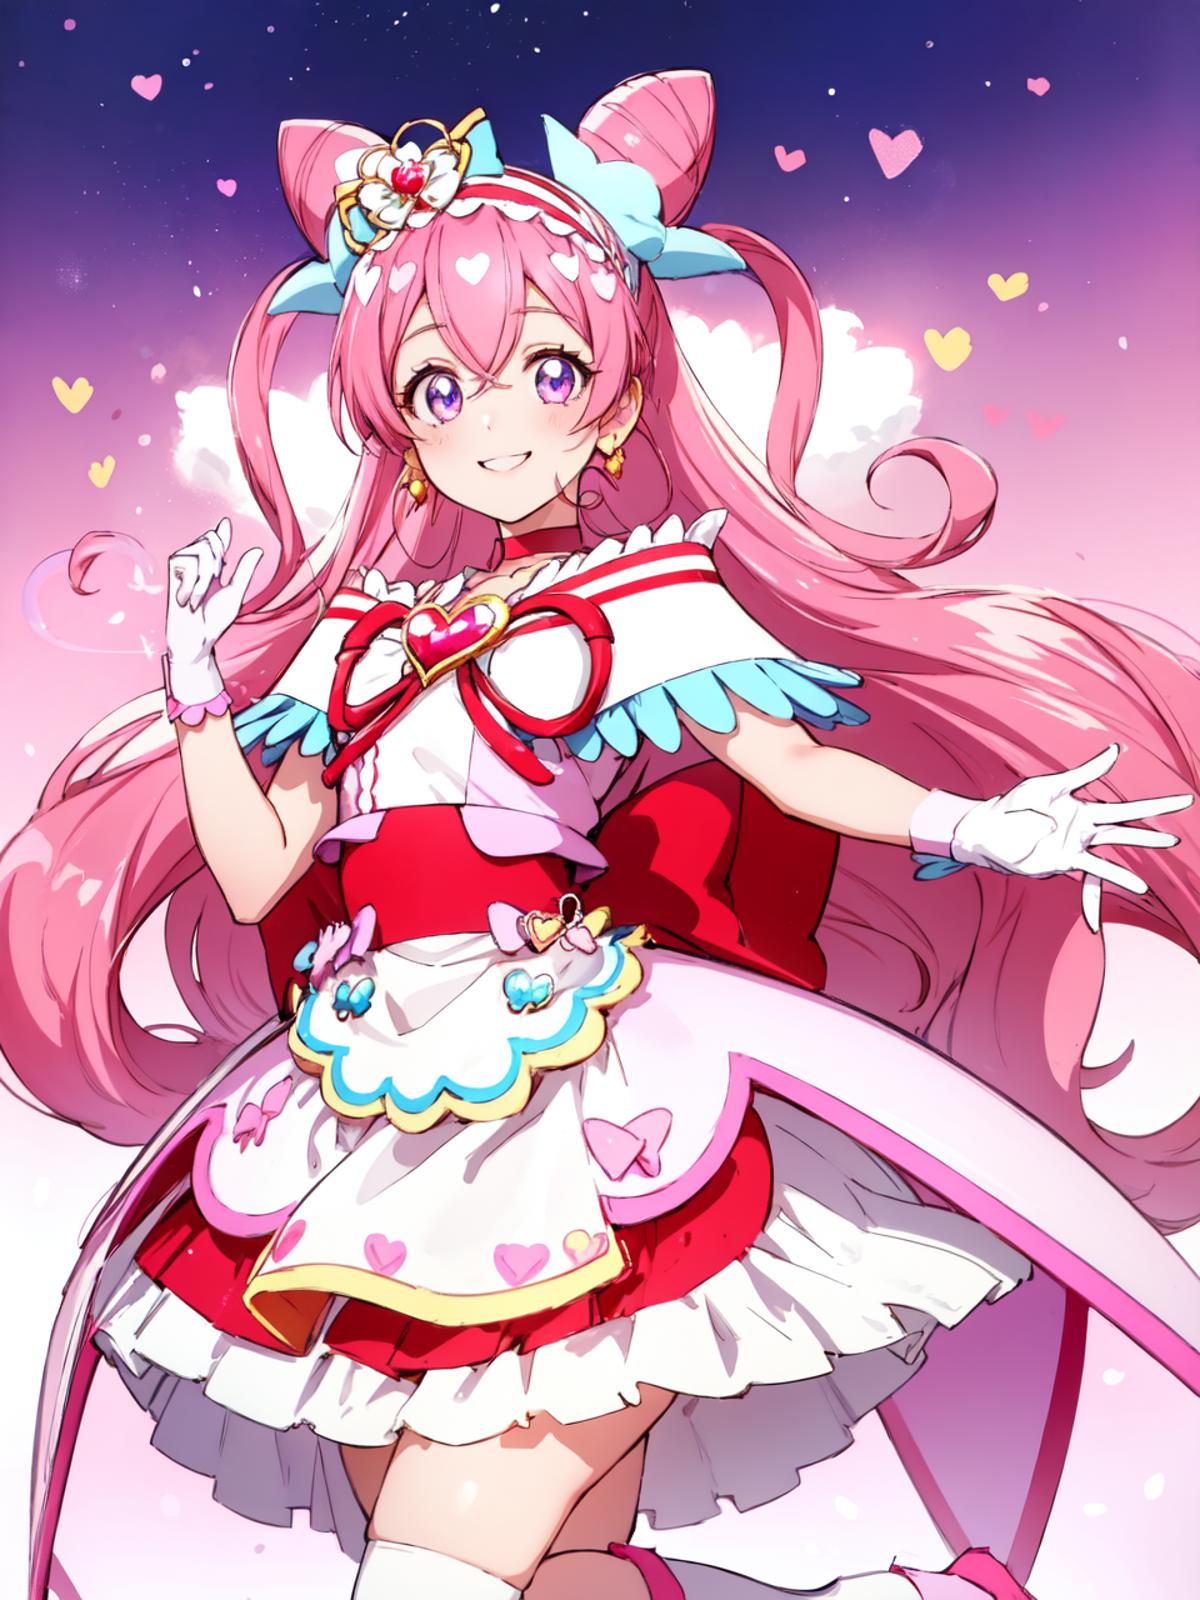 Cure Precious (Delicious Party♡Pretty Cure) デリシャスパーティ♡プリキュア キュアプレシャス image by secretmoon